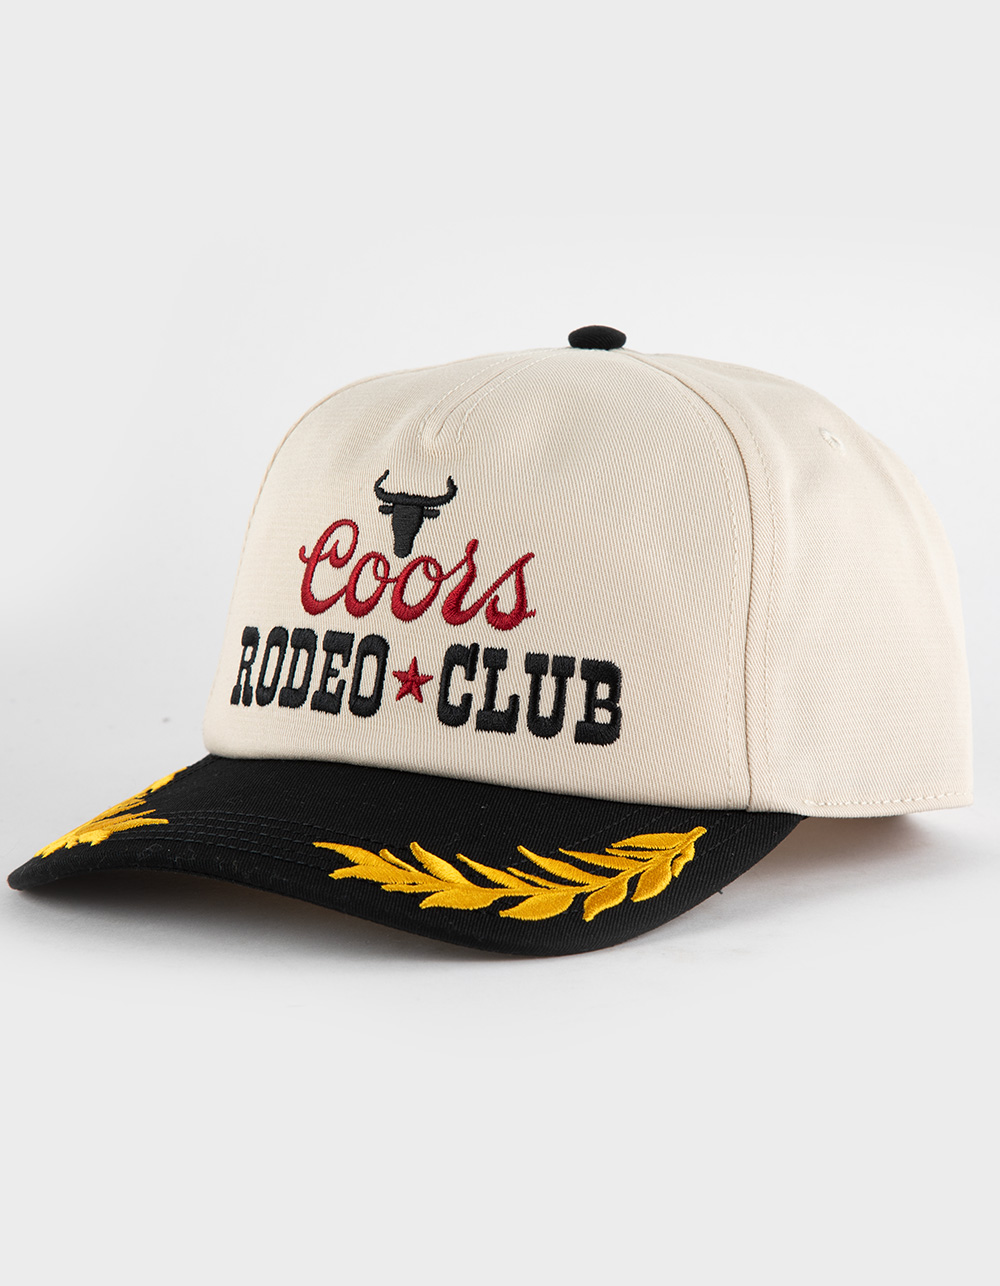 AMERICAN NEEDLE Coors Rodeo Club Snapback Hat